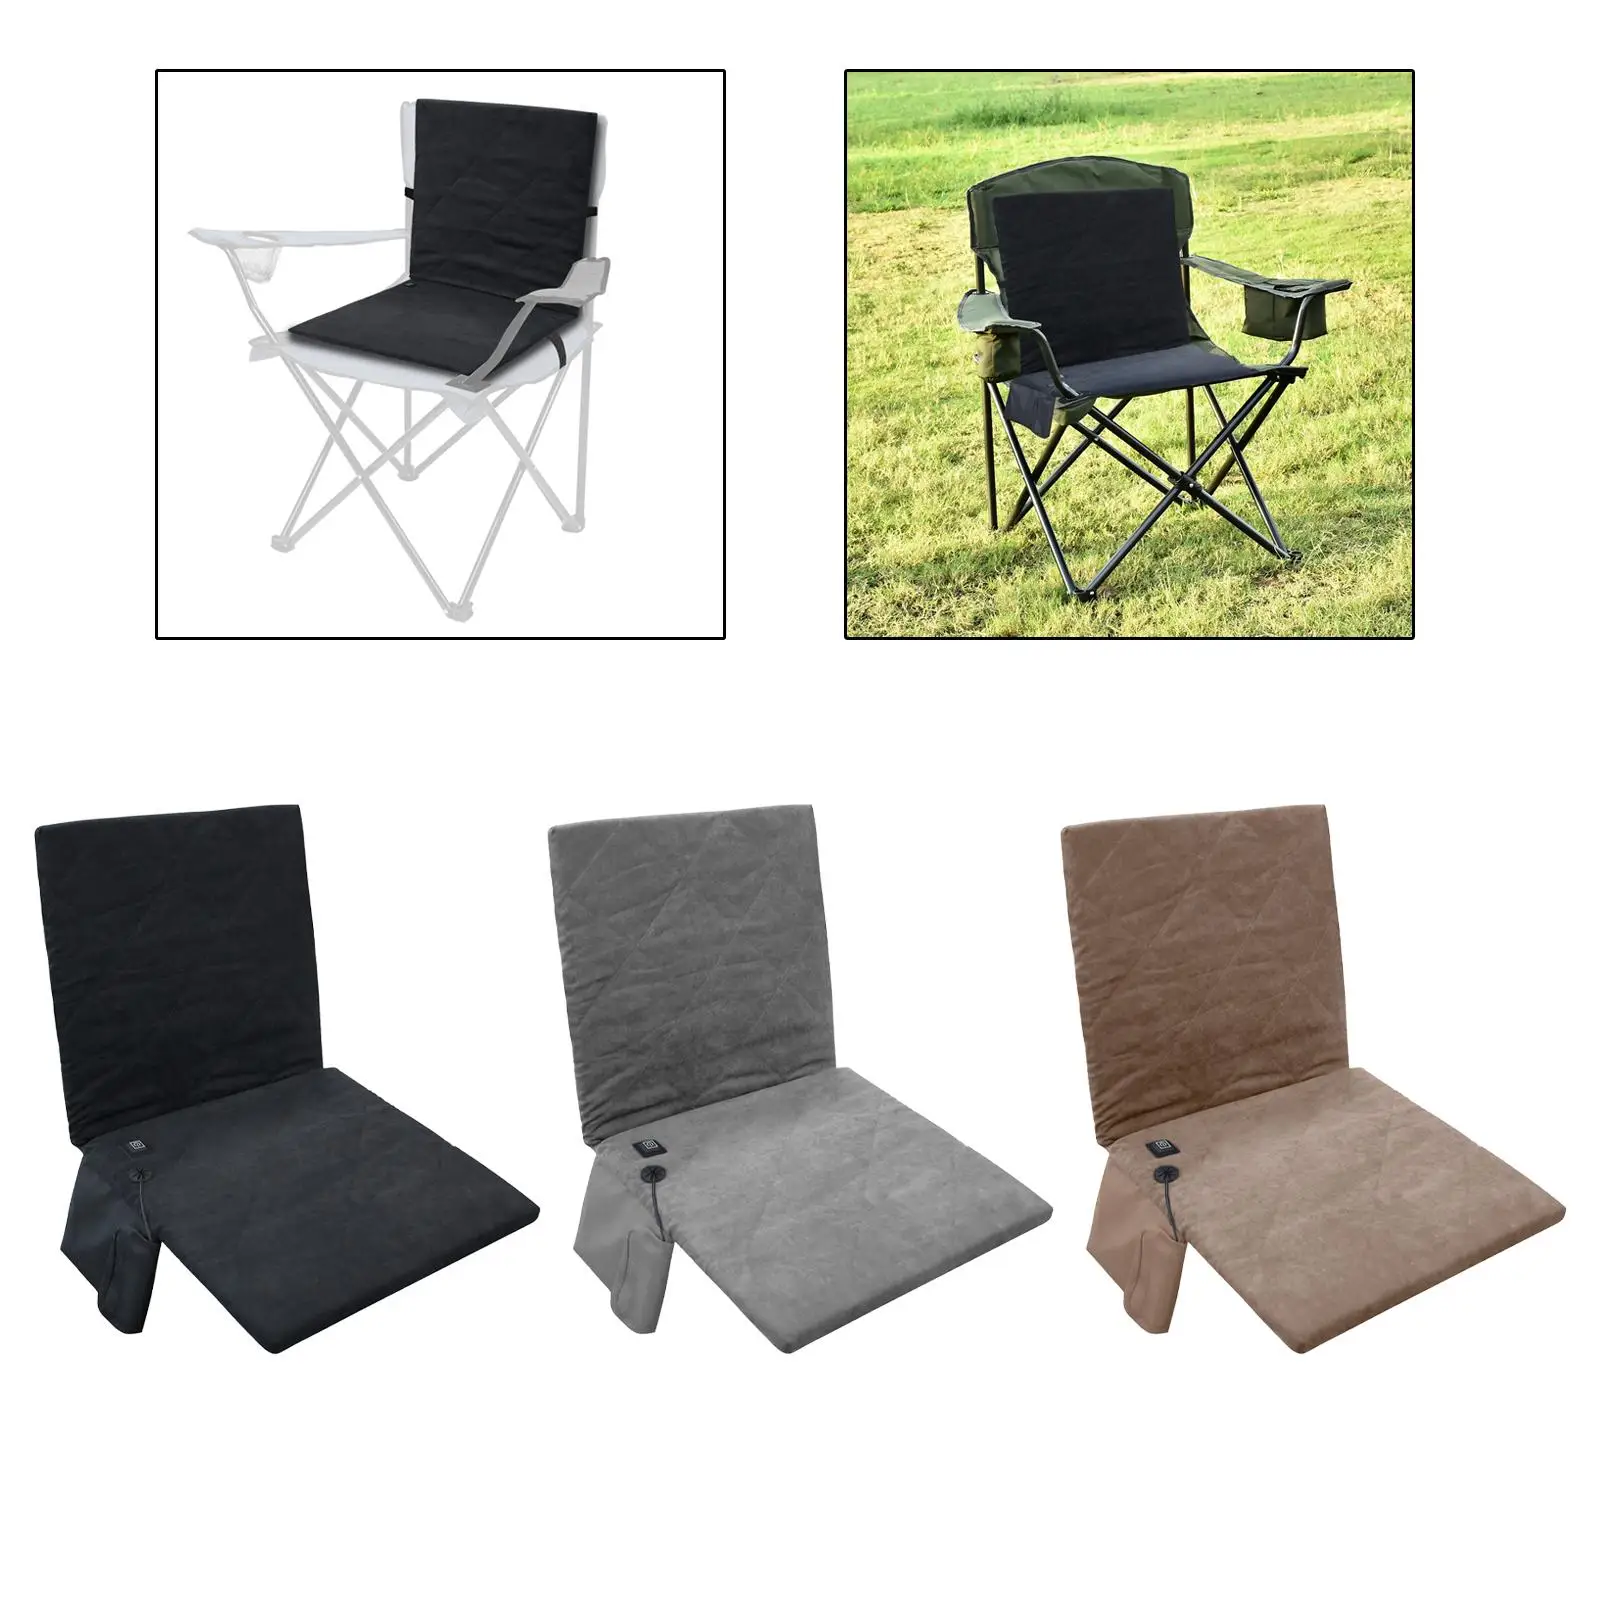 Heated Camping Chair Heated Cushion Adjustable Temperature Comfort for BBQ